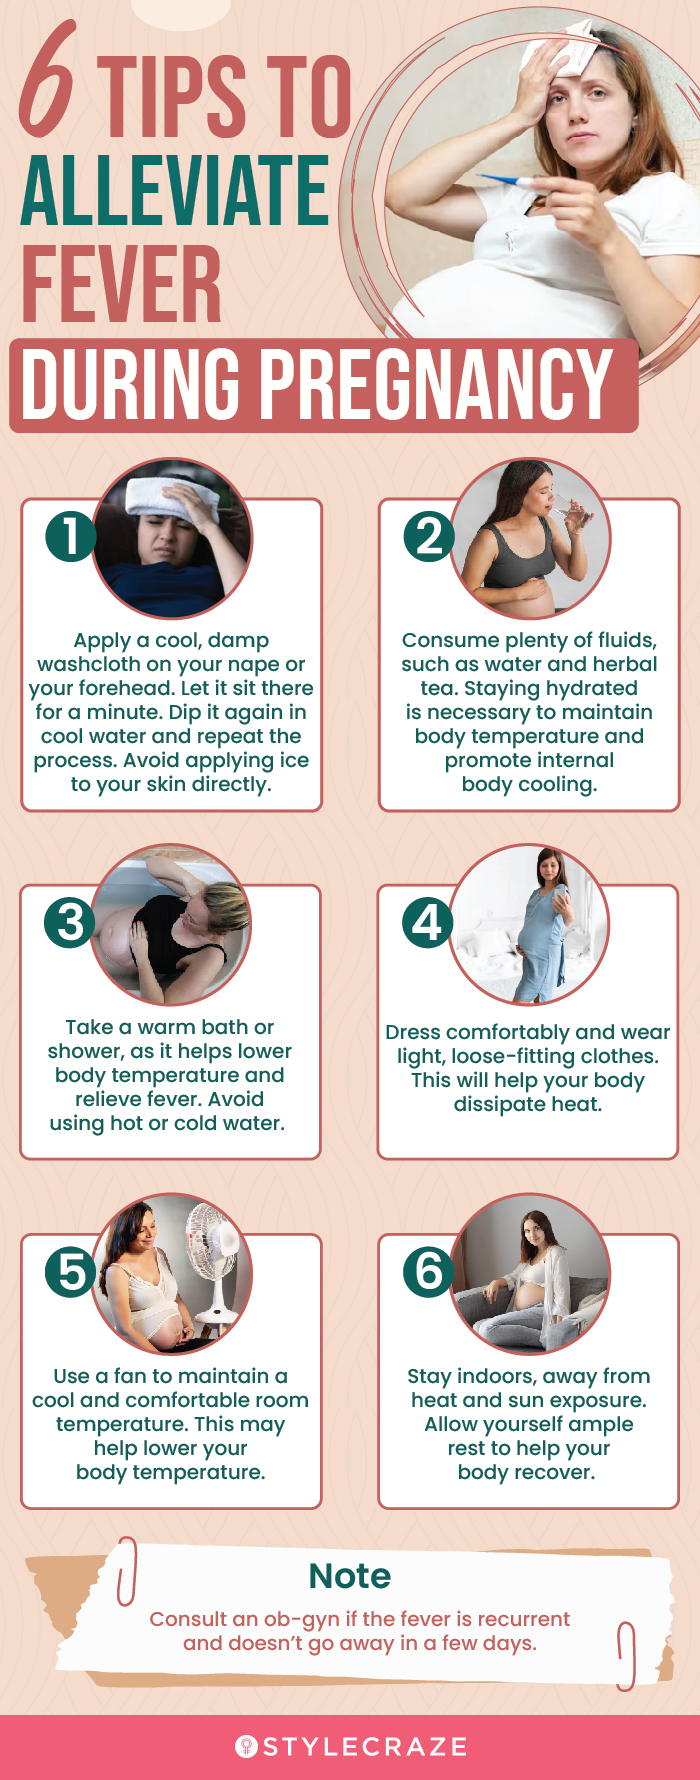 6 tips to alleviate fever during pregnancy (infographic)